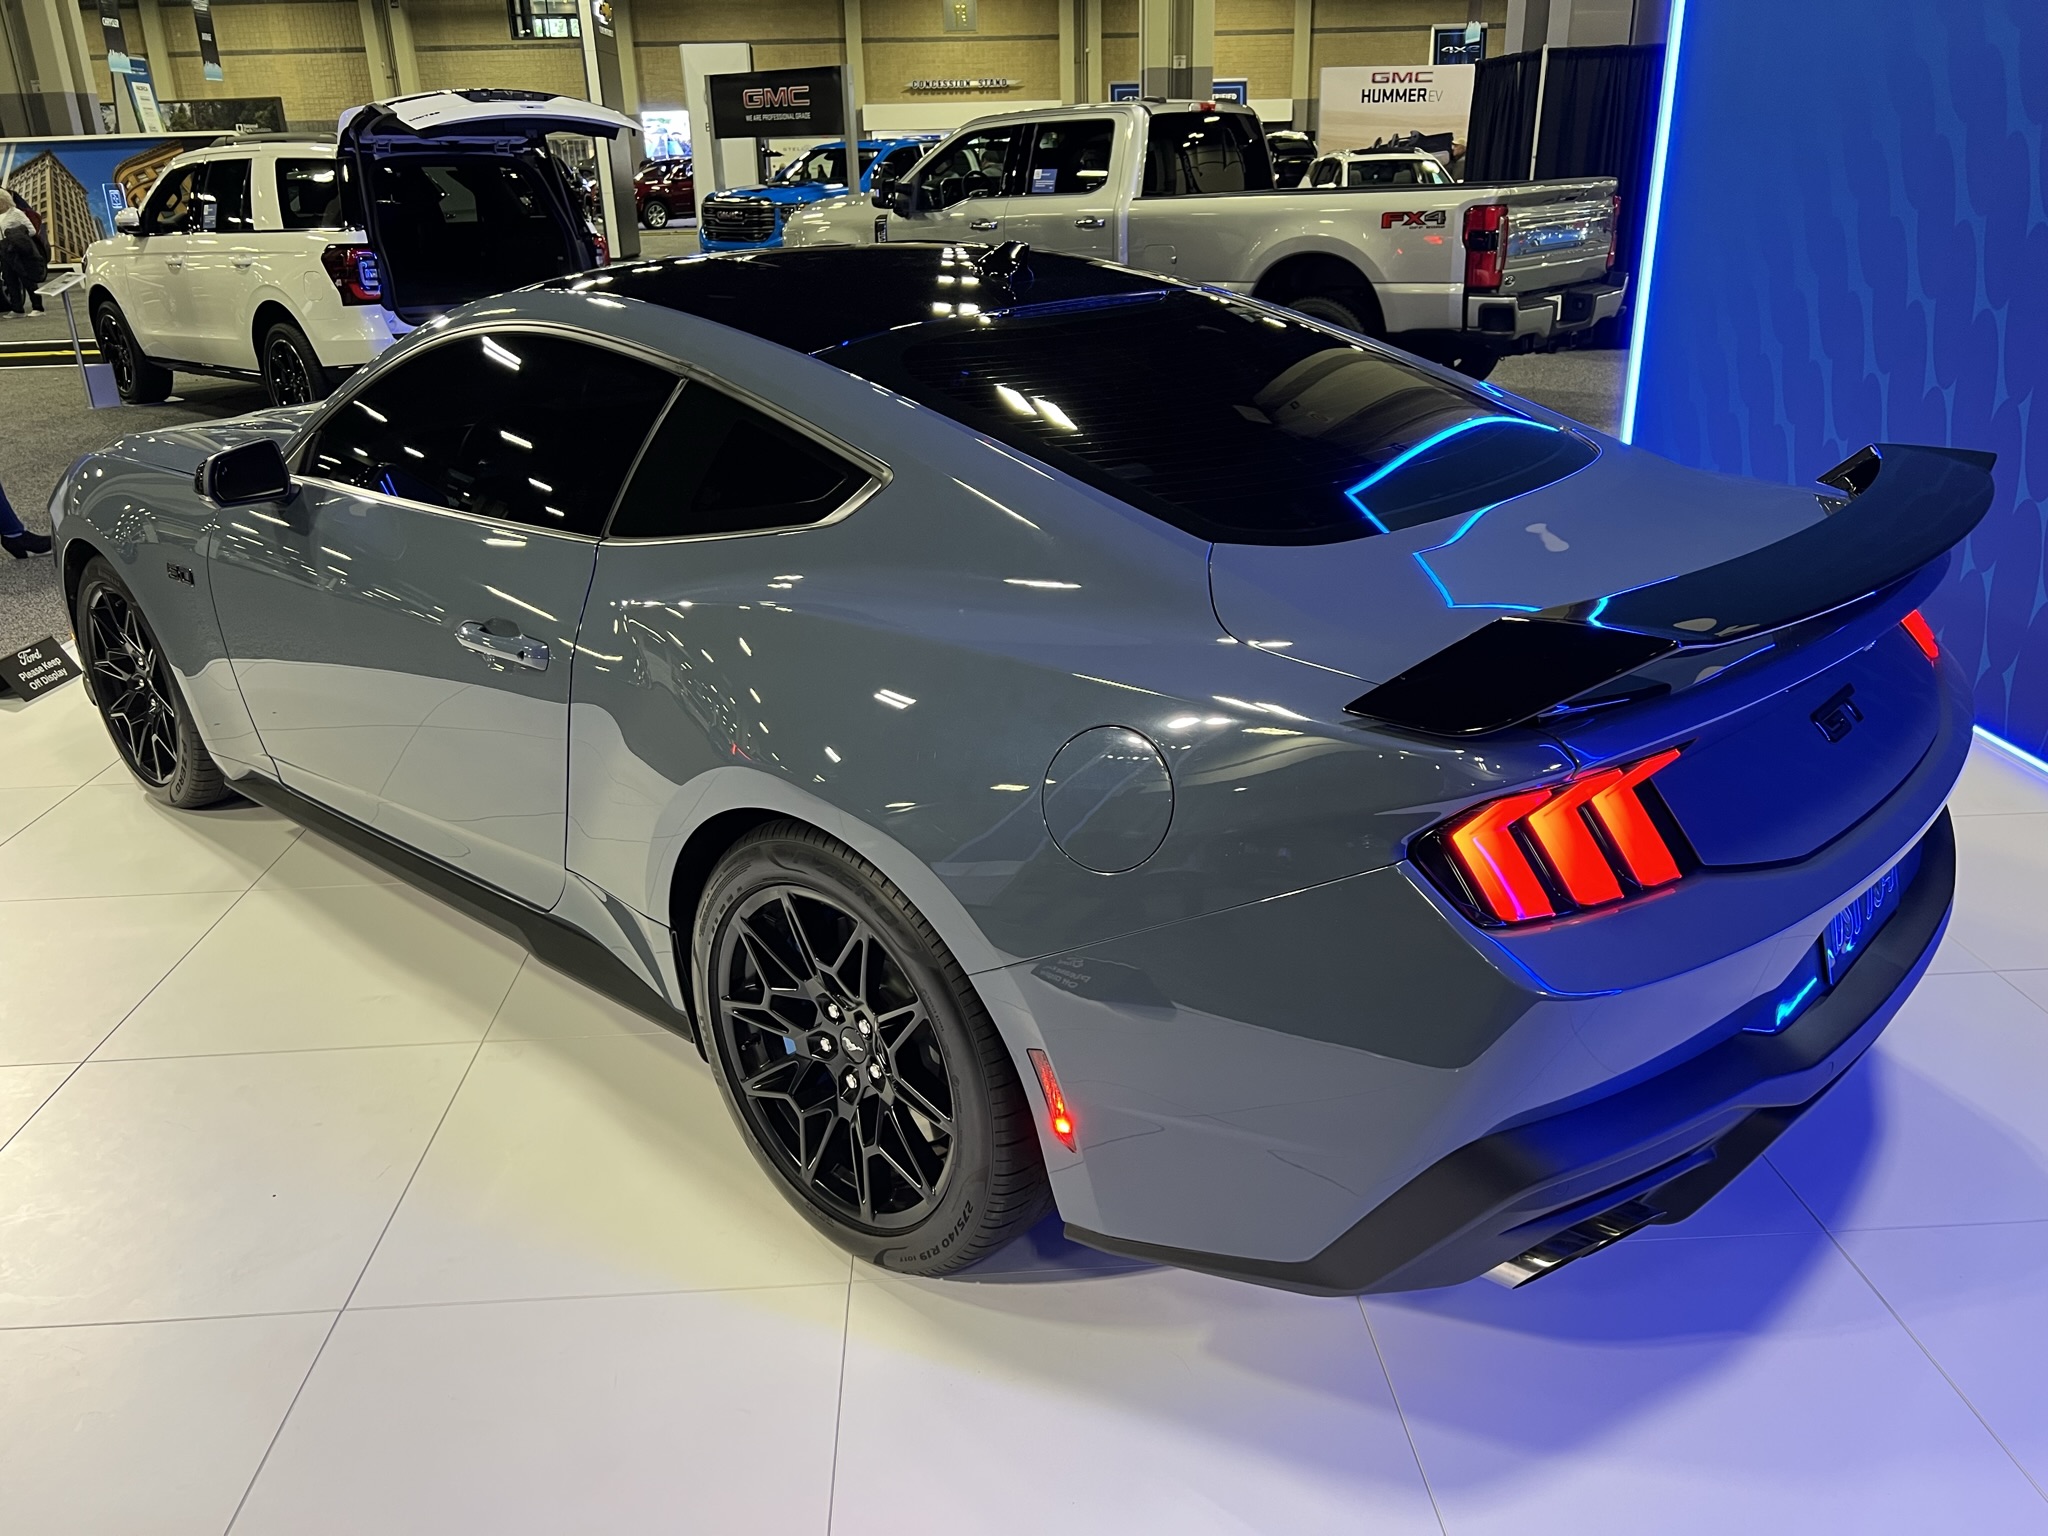 S650 Mustang S650 GT @ Charlotte Auto Show IMG_1812.JPEG